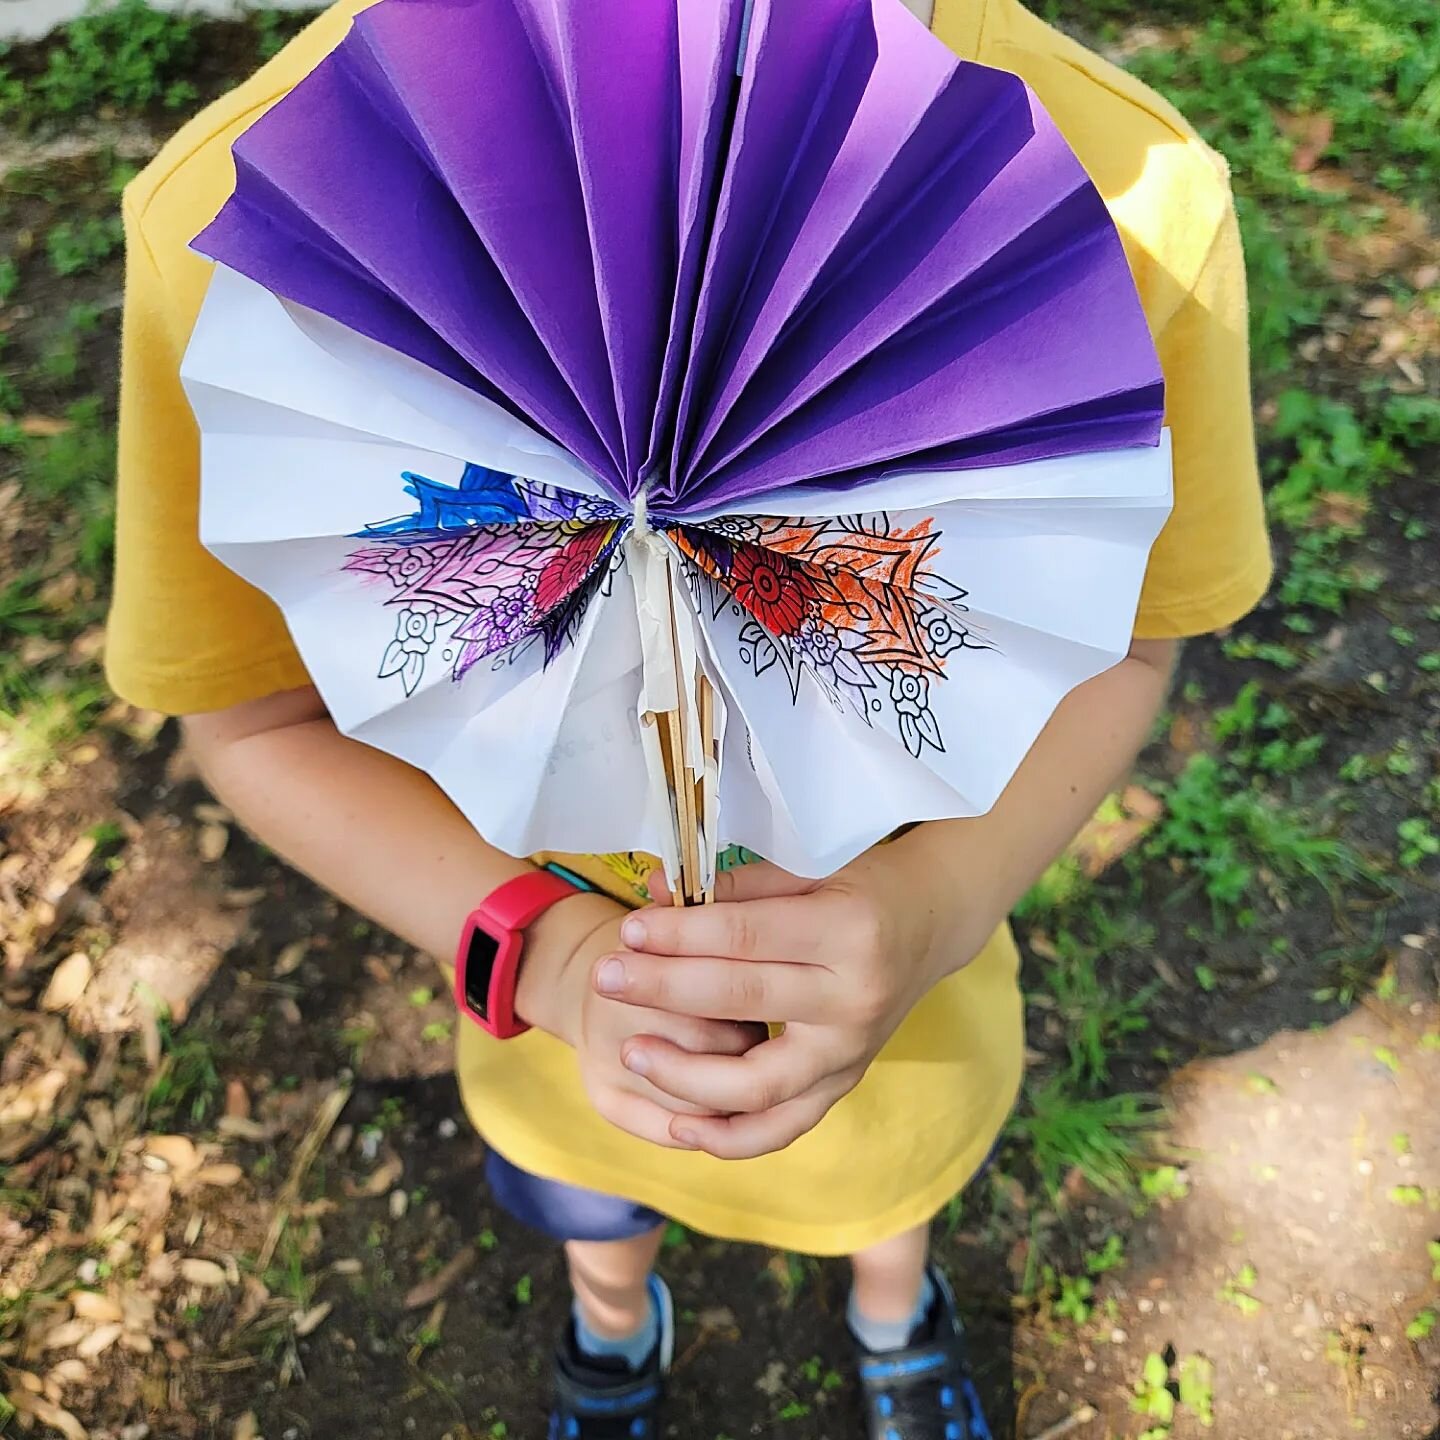 🌞
Crafternooners made paper fans yesterday! 

We've got our website in Bio! 
🌞